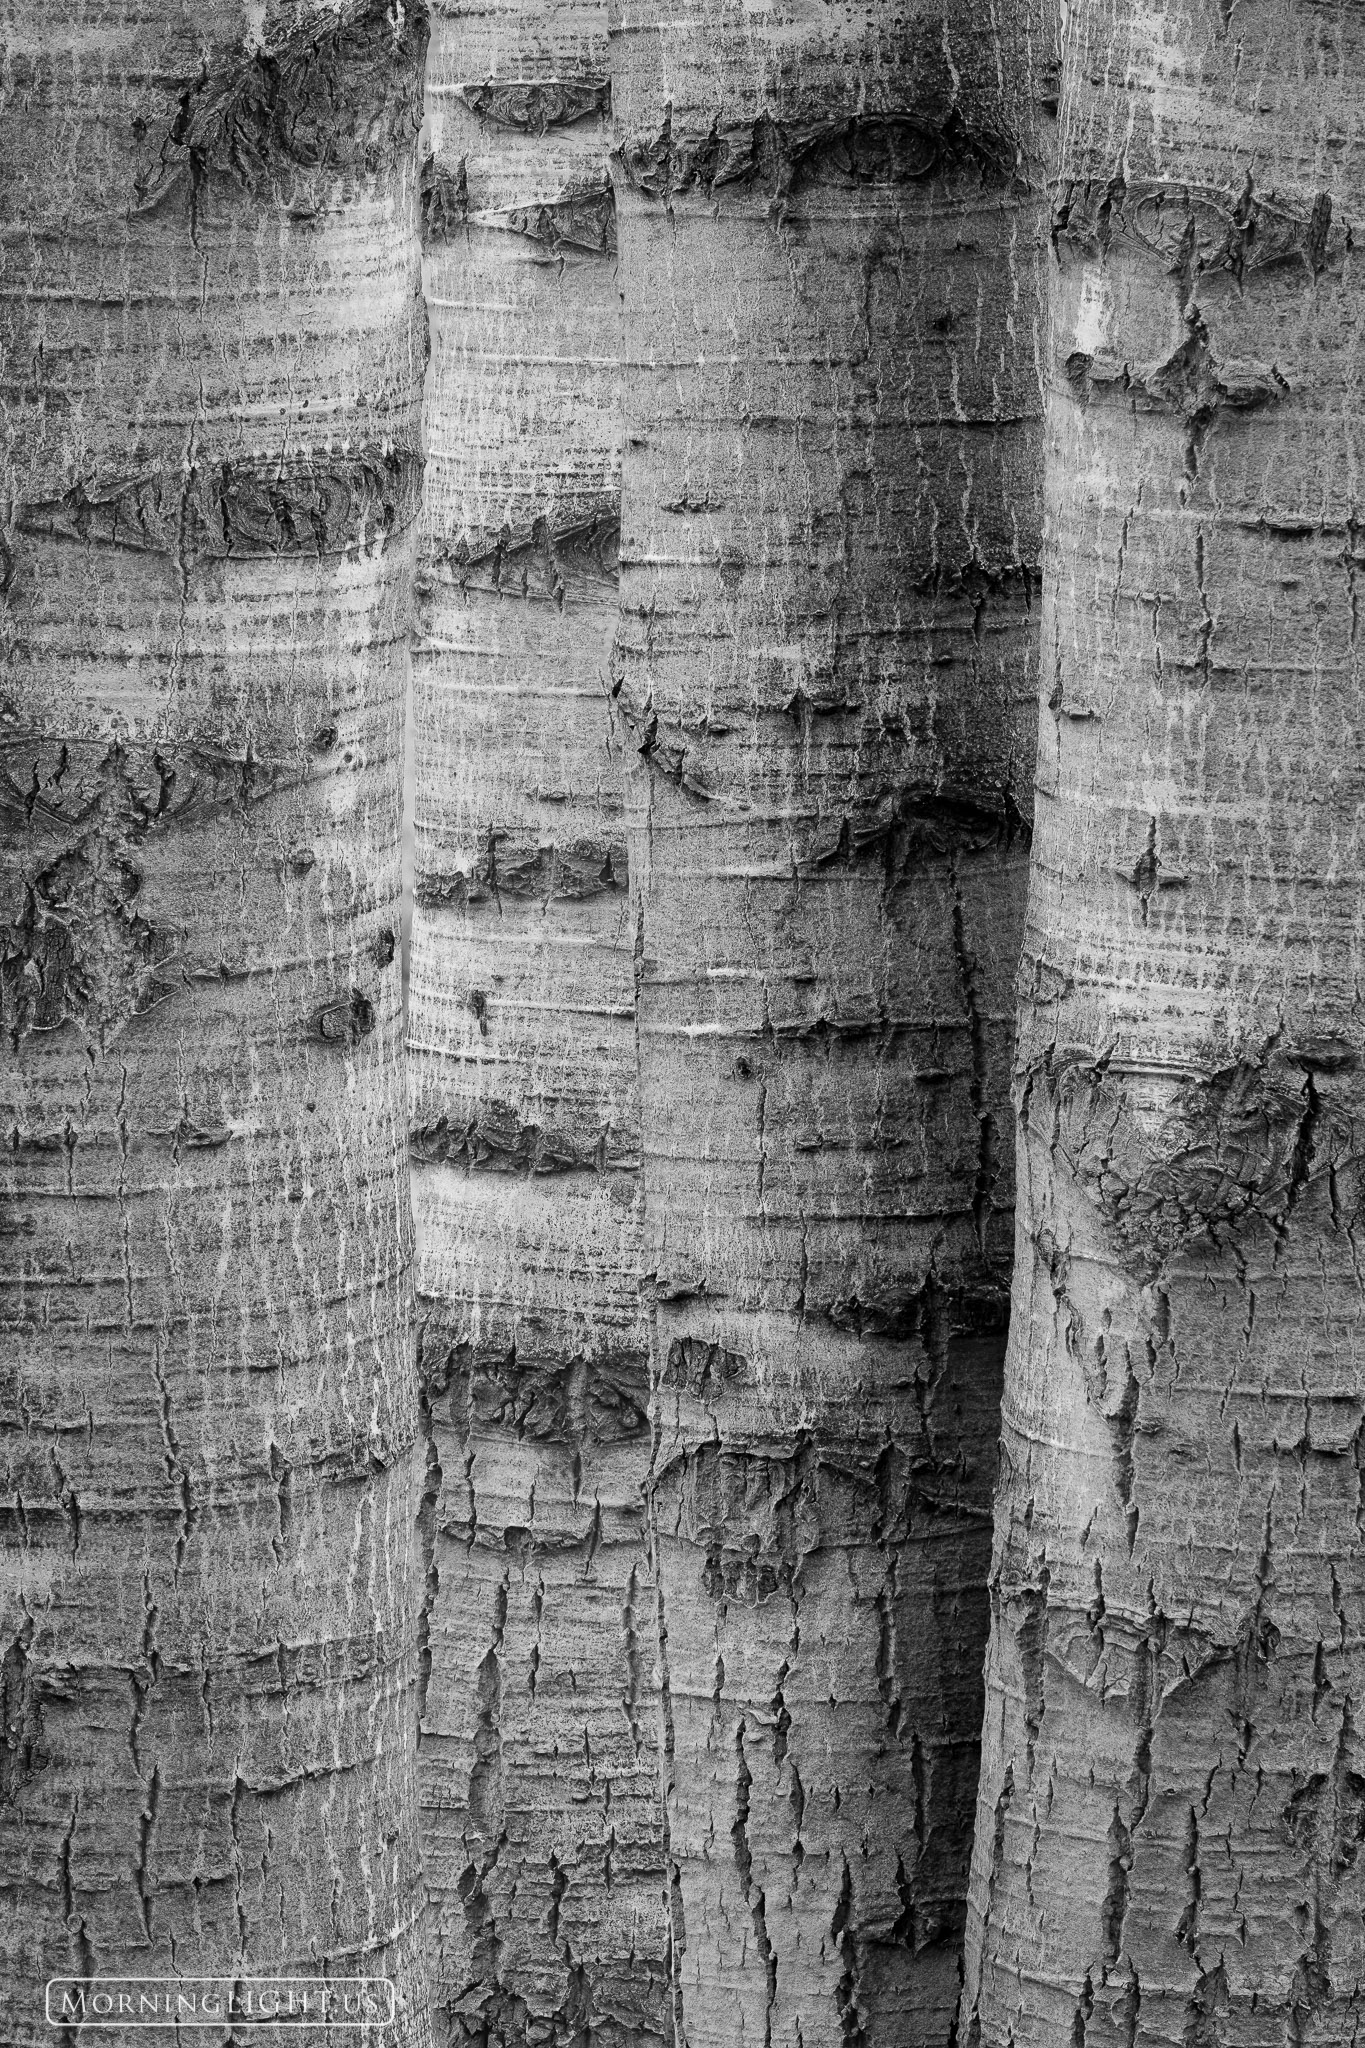 A stand of aspen trunks cluster together as if to protect something precious. These trunks were unlike any I've seen elsewhere...